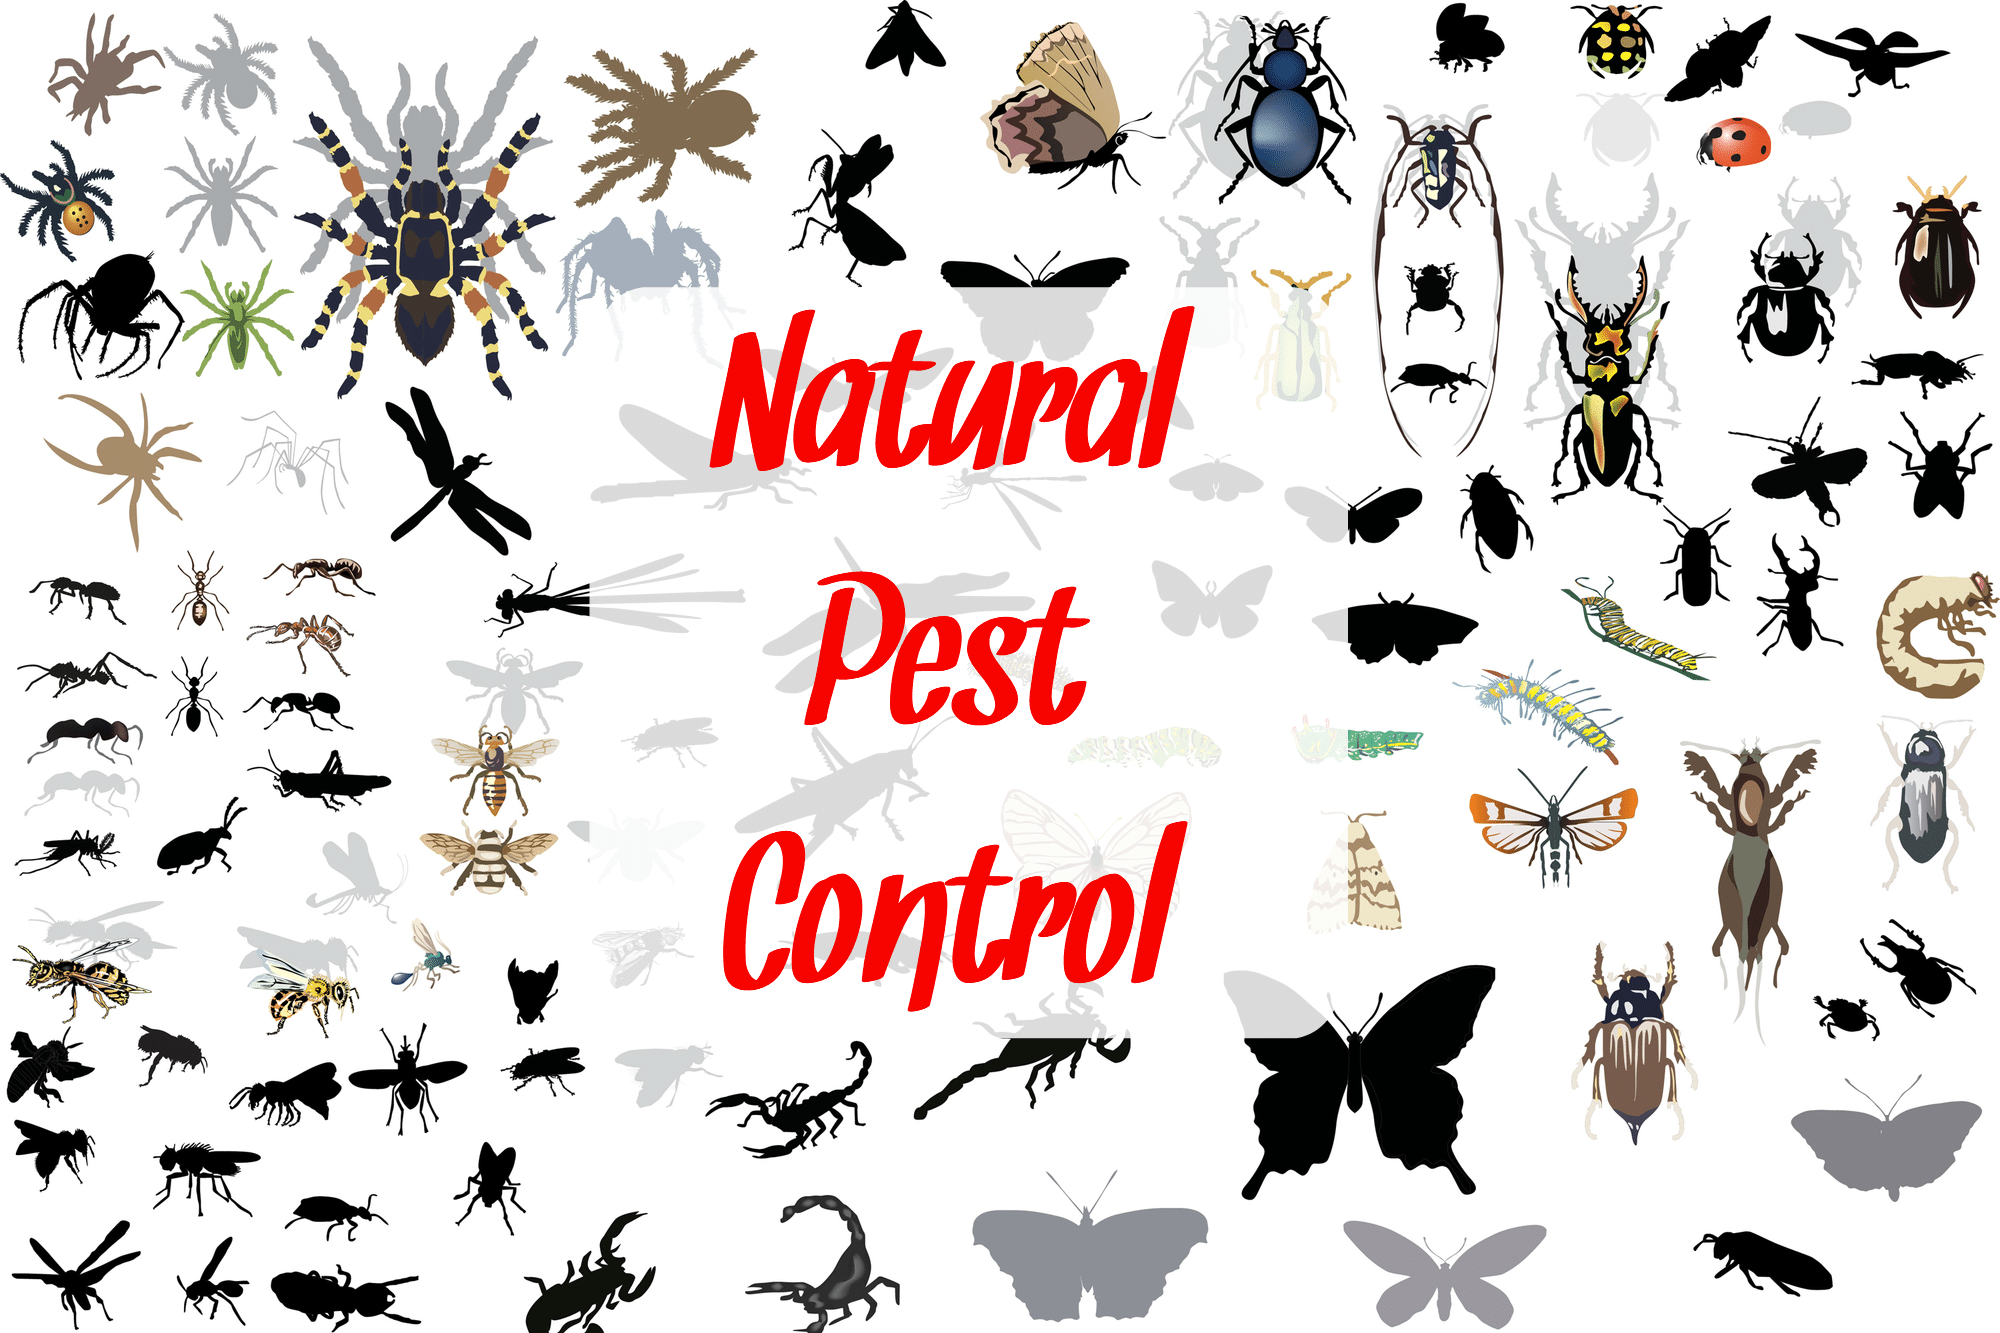 Insects of all kinds representing natural pest control